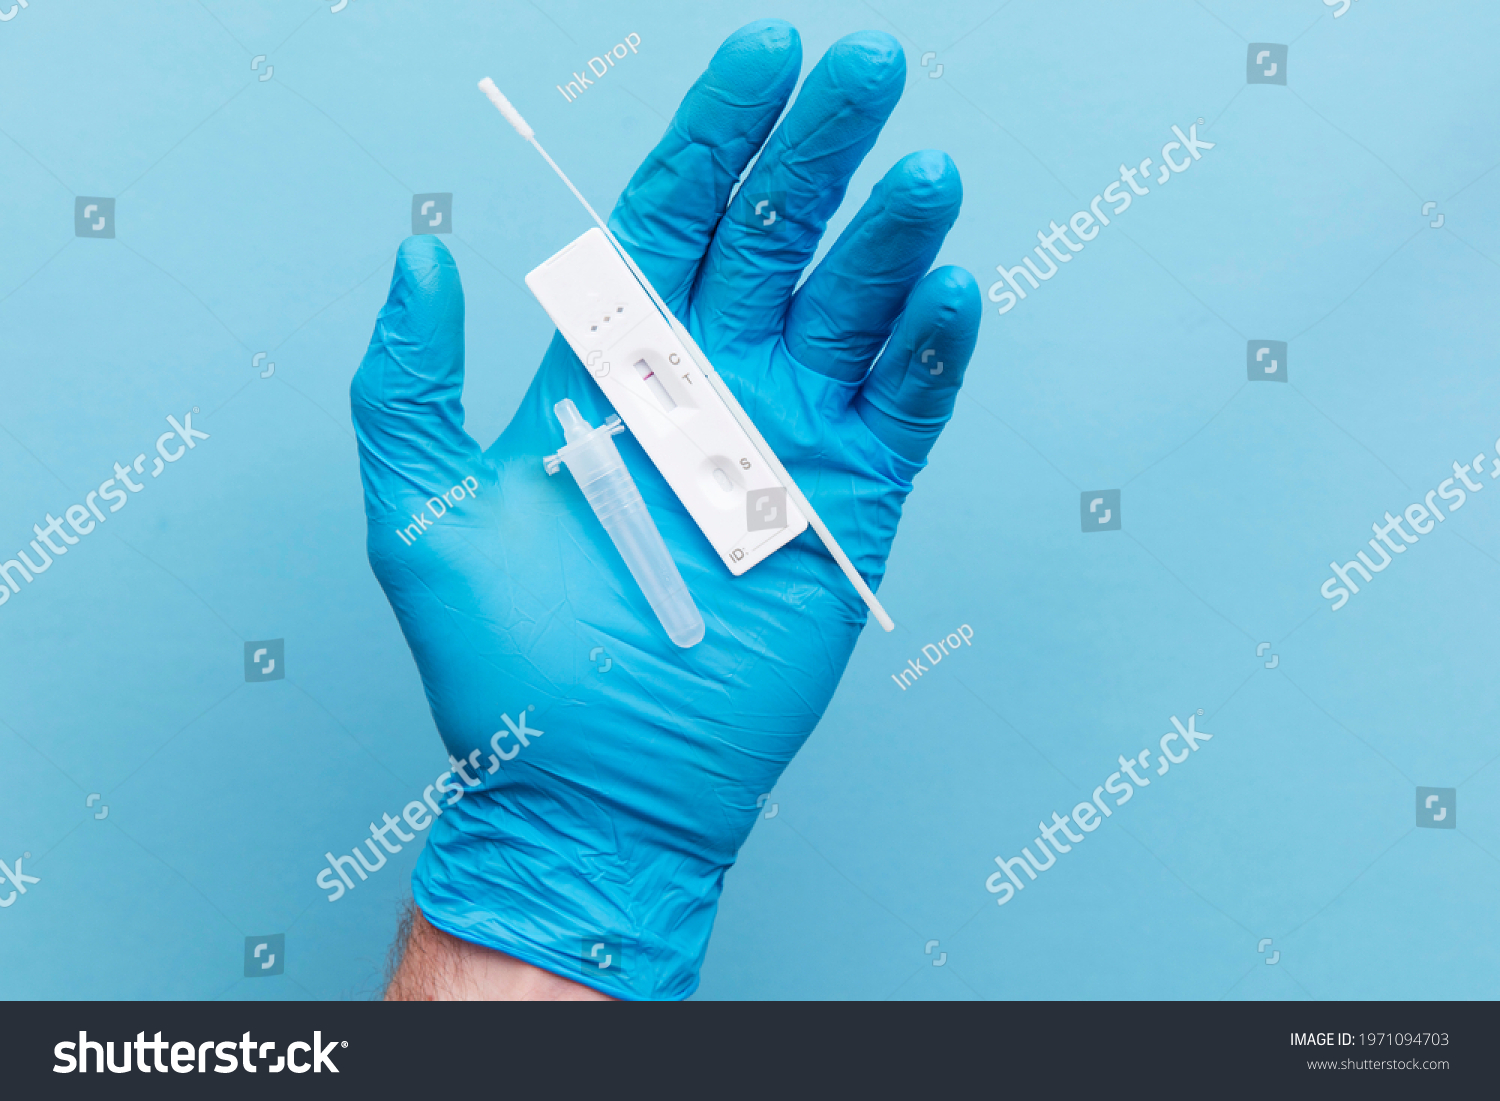 Doctor in blue gloves using a lateral flow covid-19 testing kit #1971094703